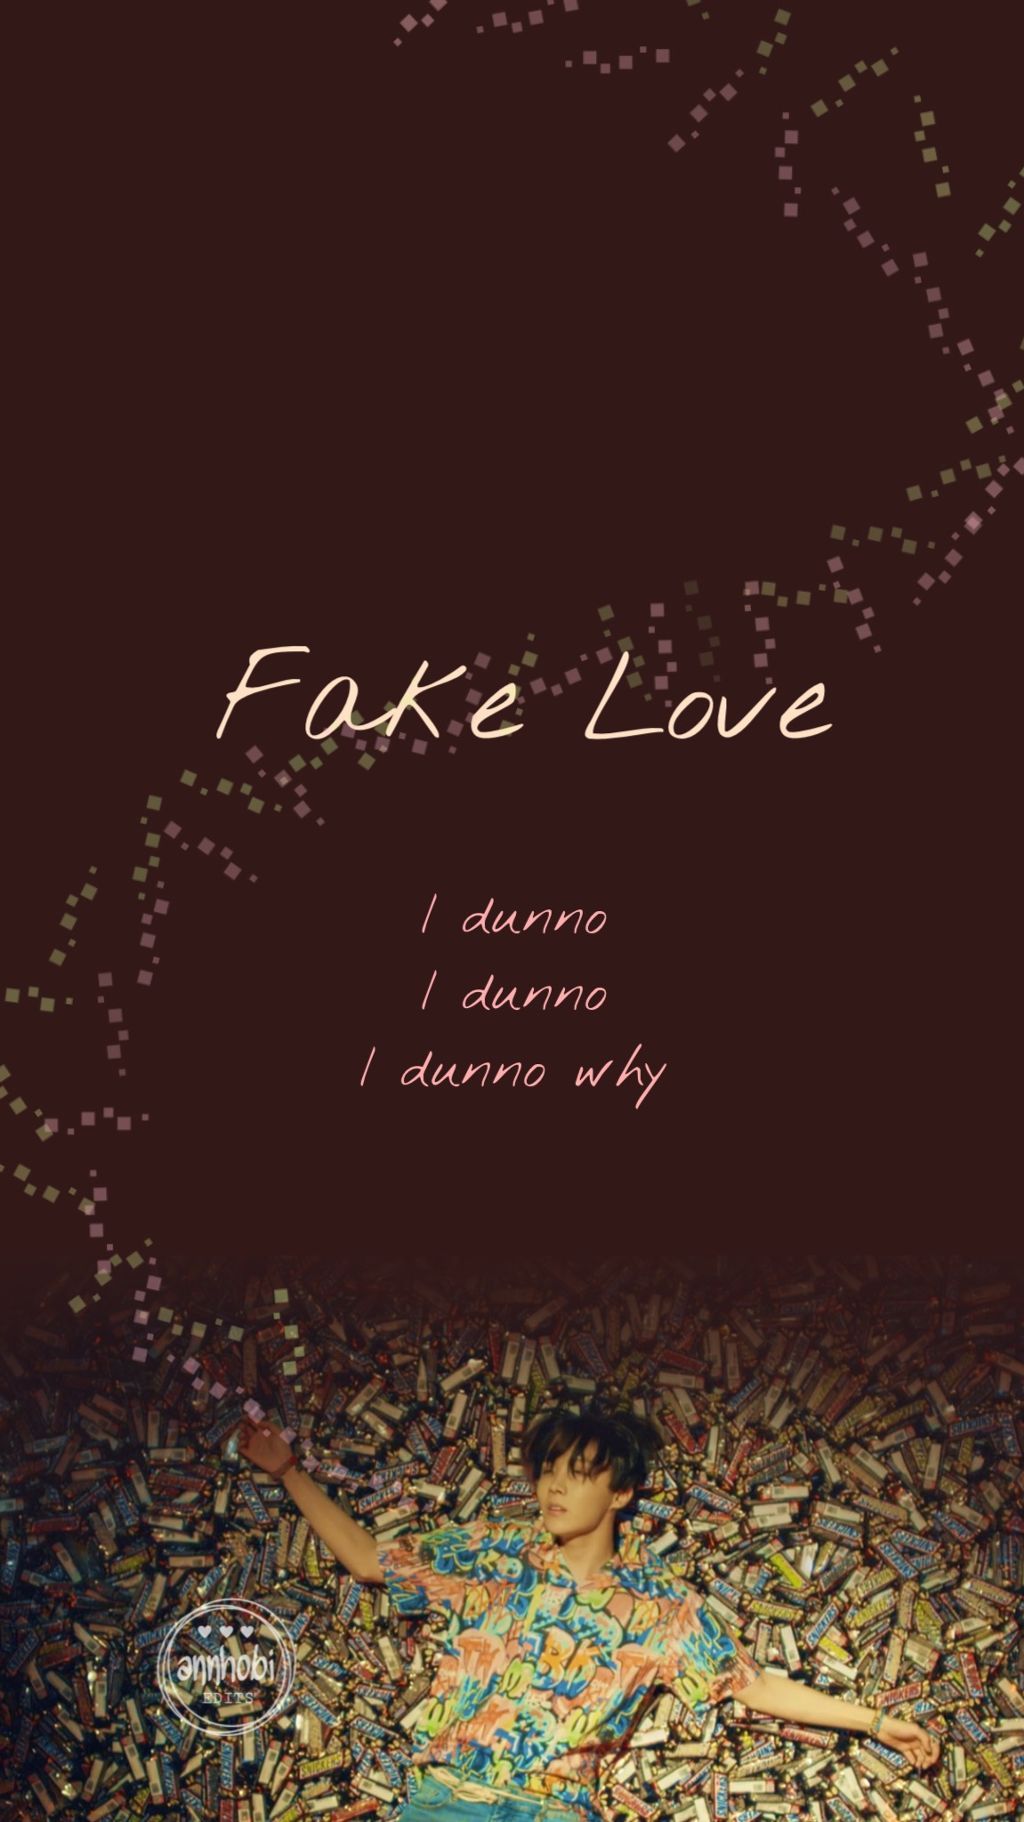 How to identify fake love